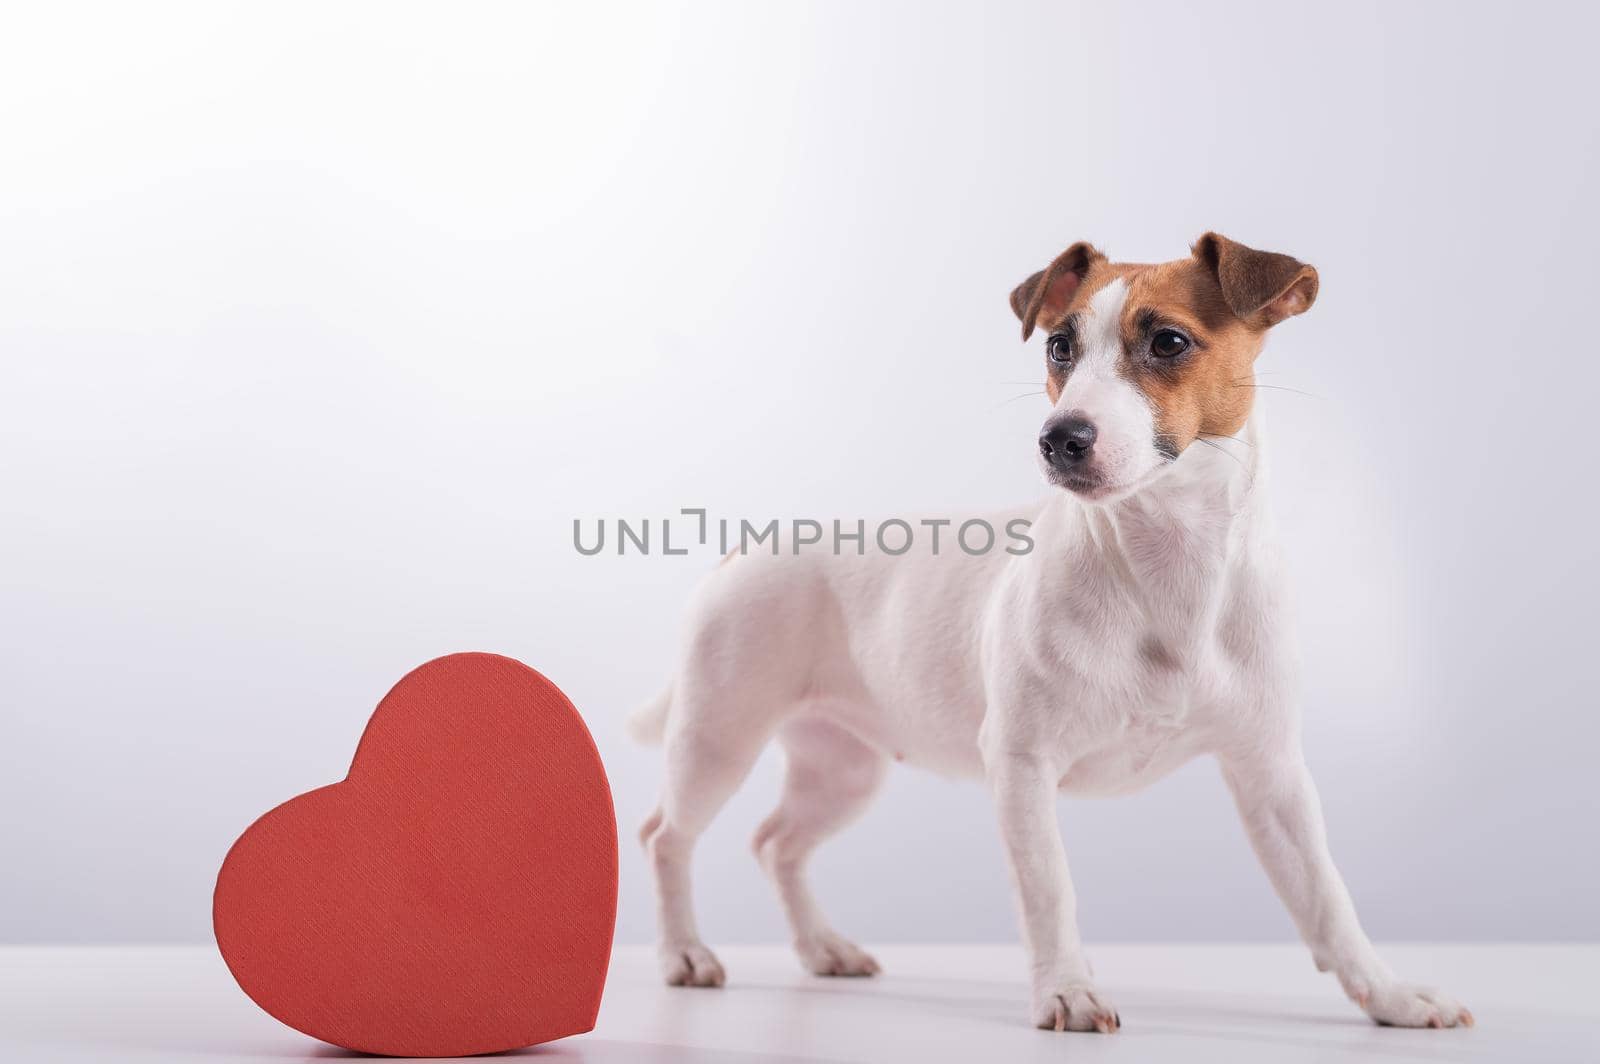 Jack Russell Terrier next to a heart-shaped box on a white background. A dog gives a romantic gift on a date by mrwed54